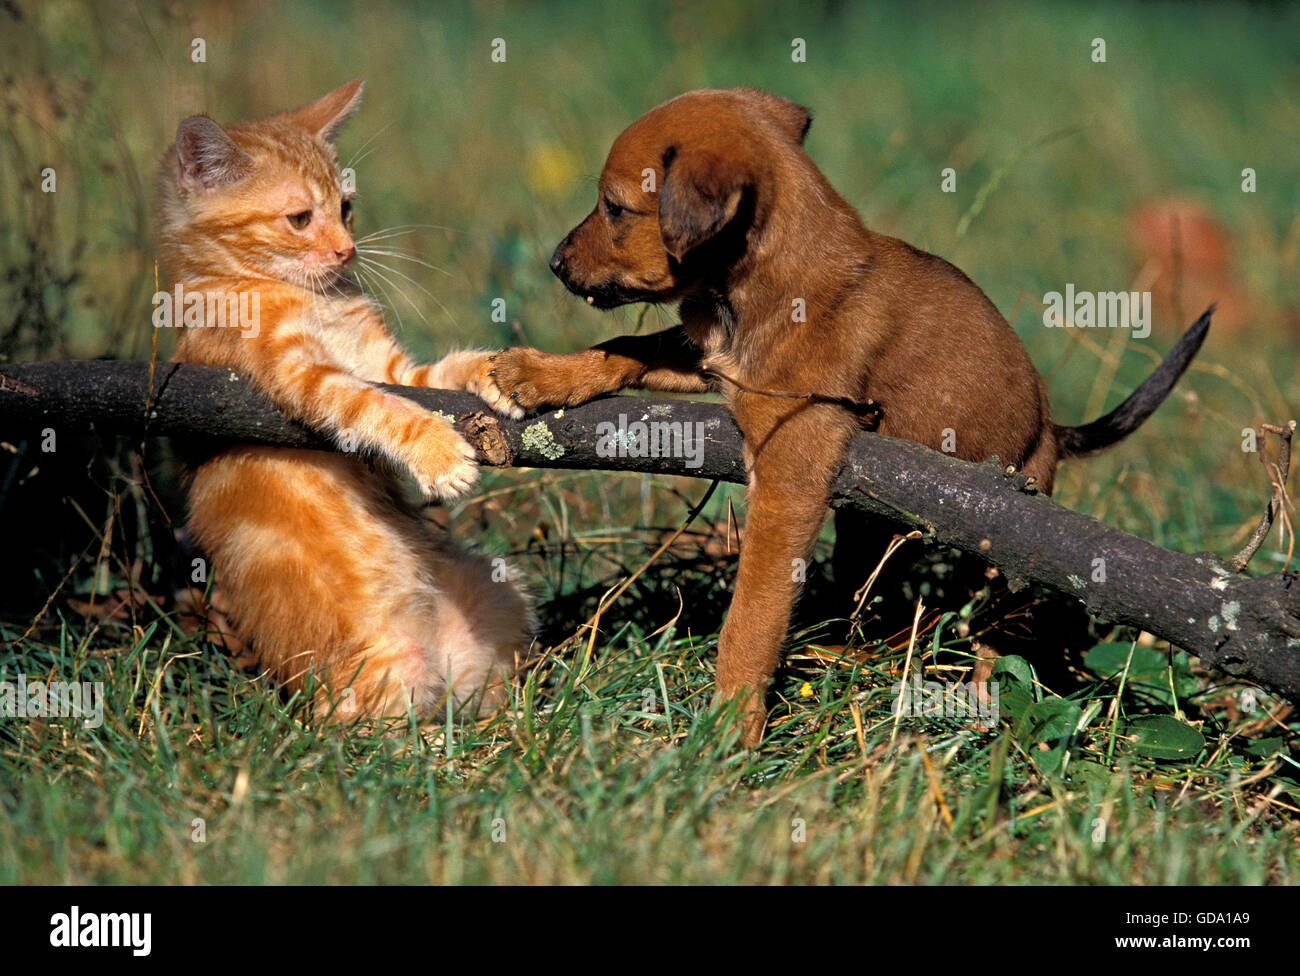 Pup with Red Tabby Domestic Cat standing on Grass Stock Photo